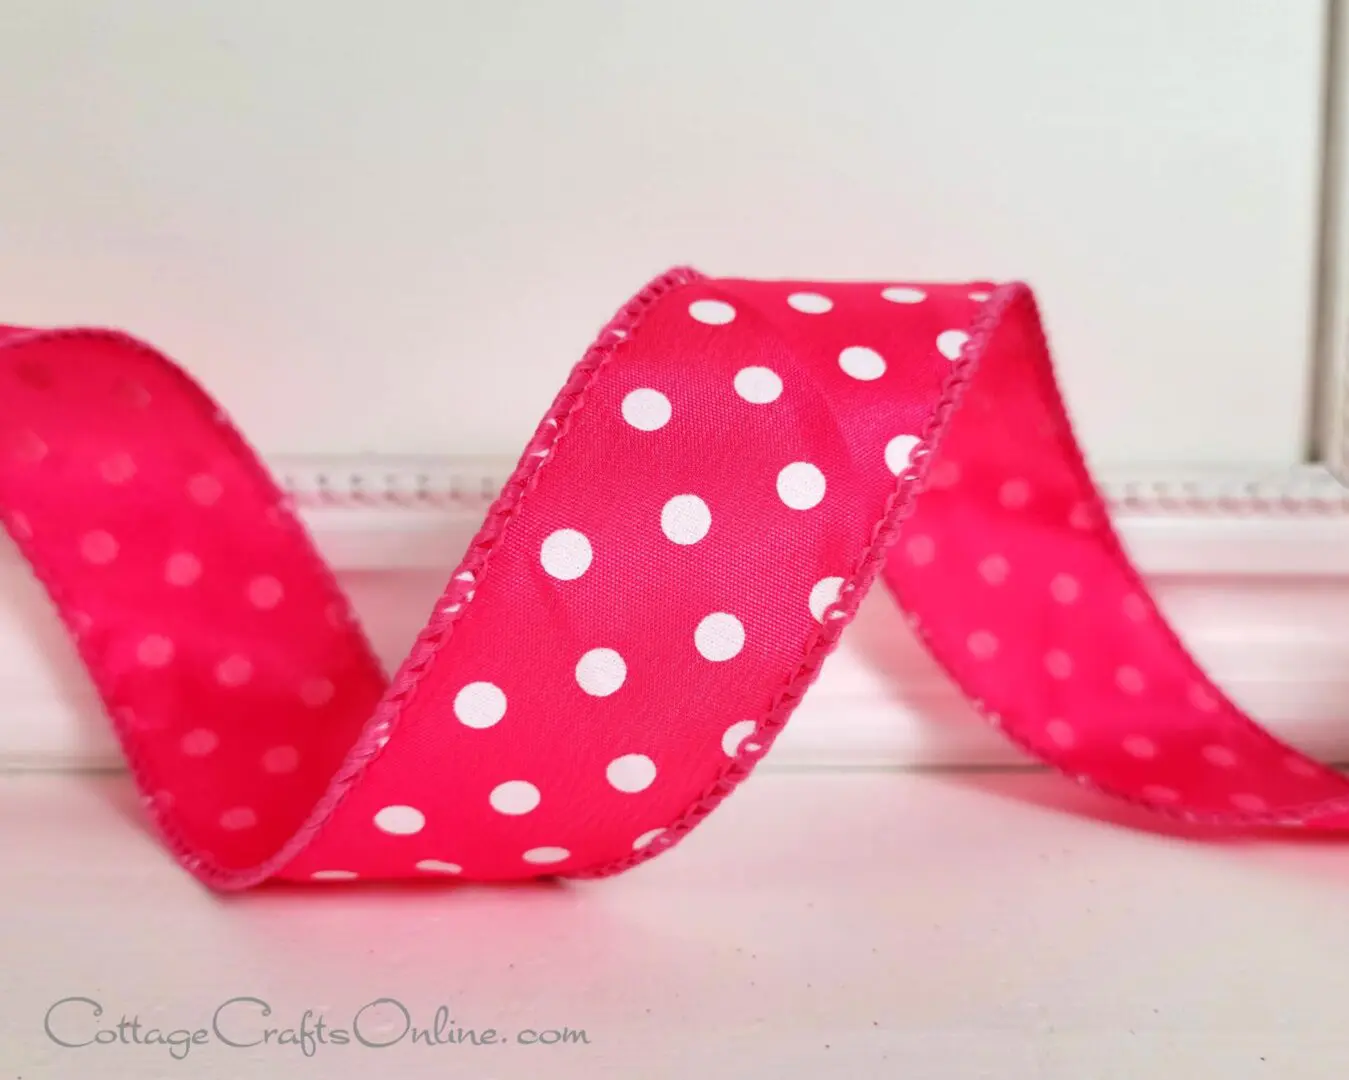 Pink and white polka dot ribbons available at Cottage Crafts Online.